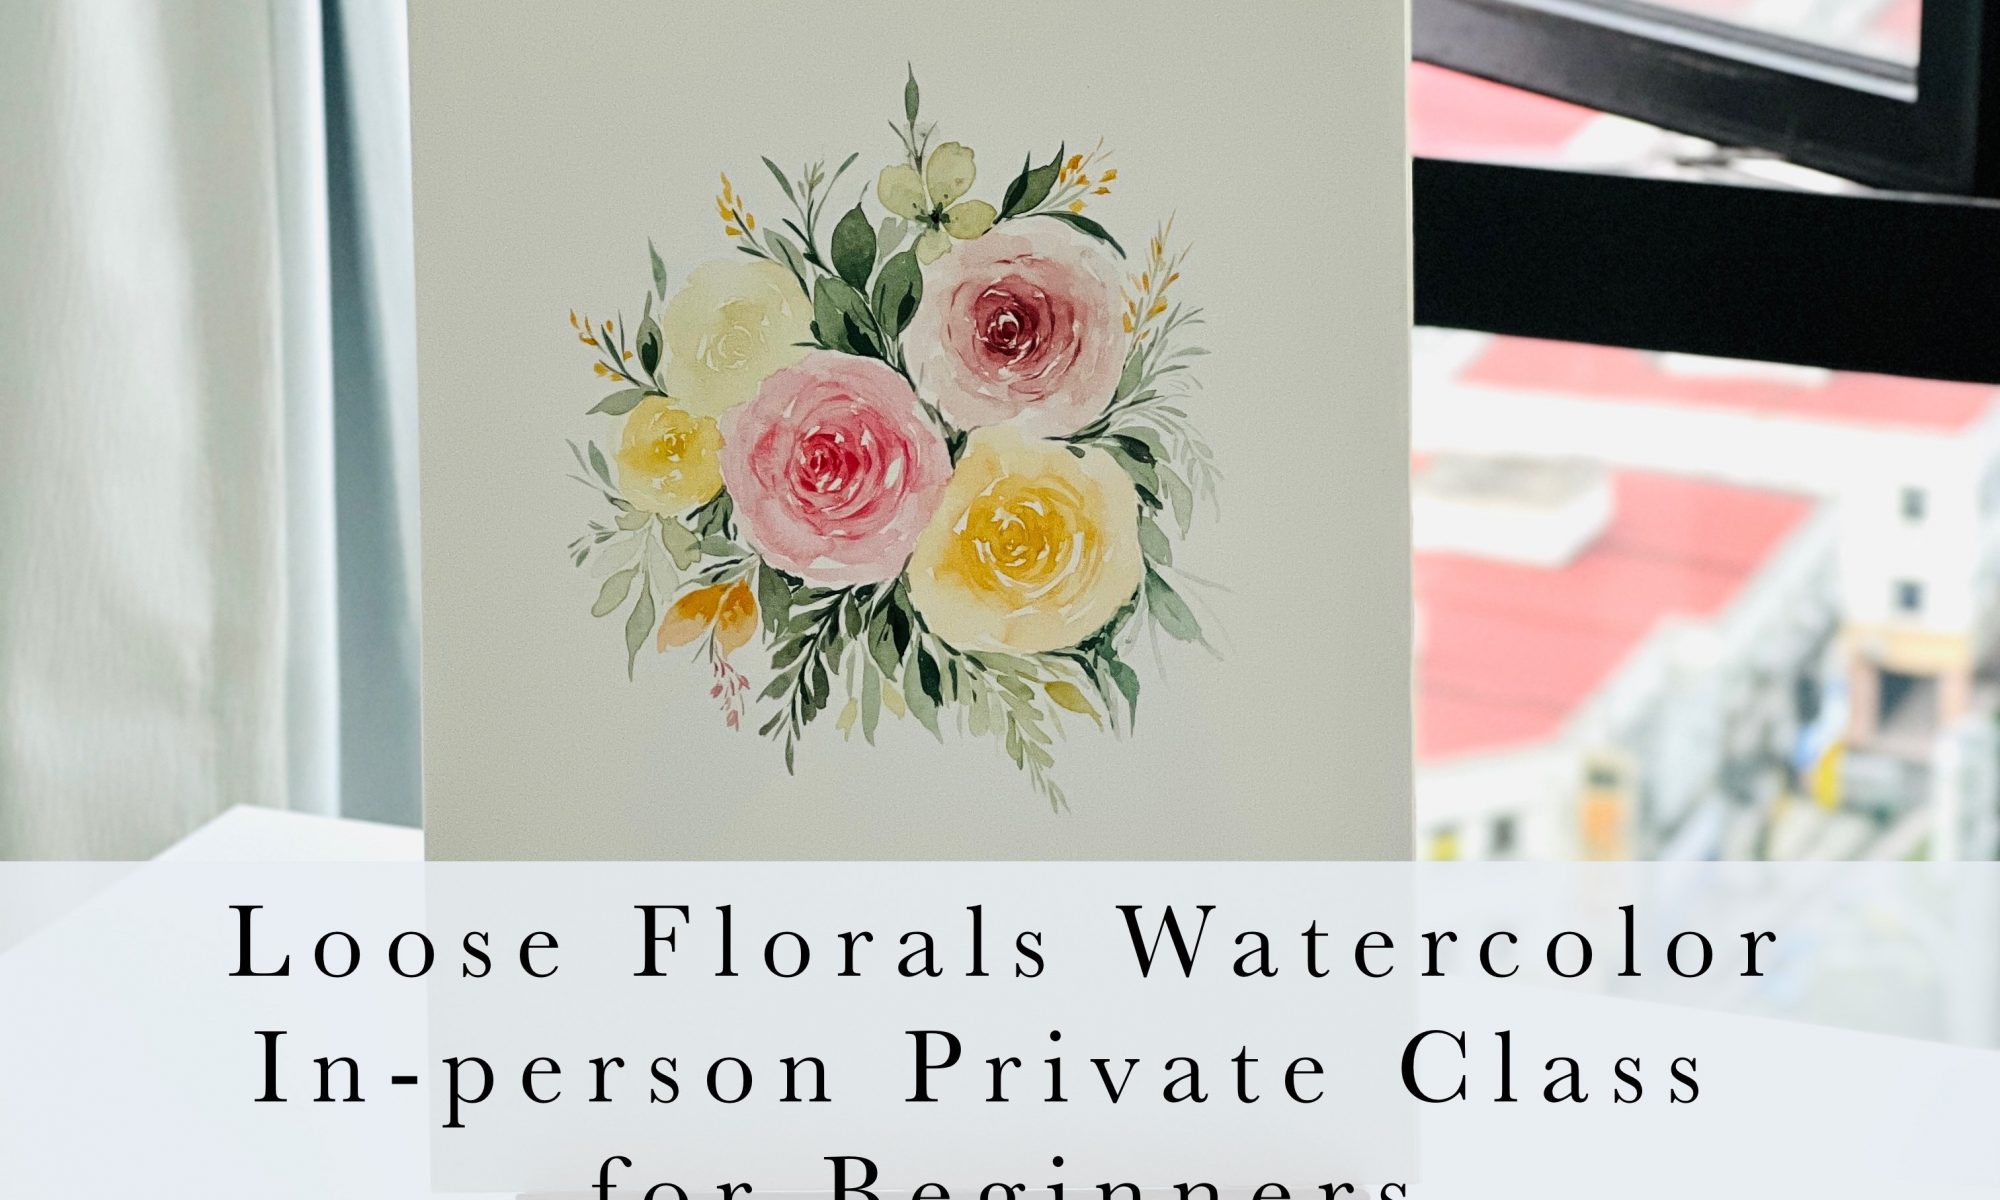 Loose Florals Watercolor Private Workshop for beginners in Kuala Lumpur Malaysia